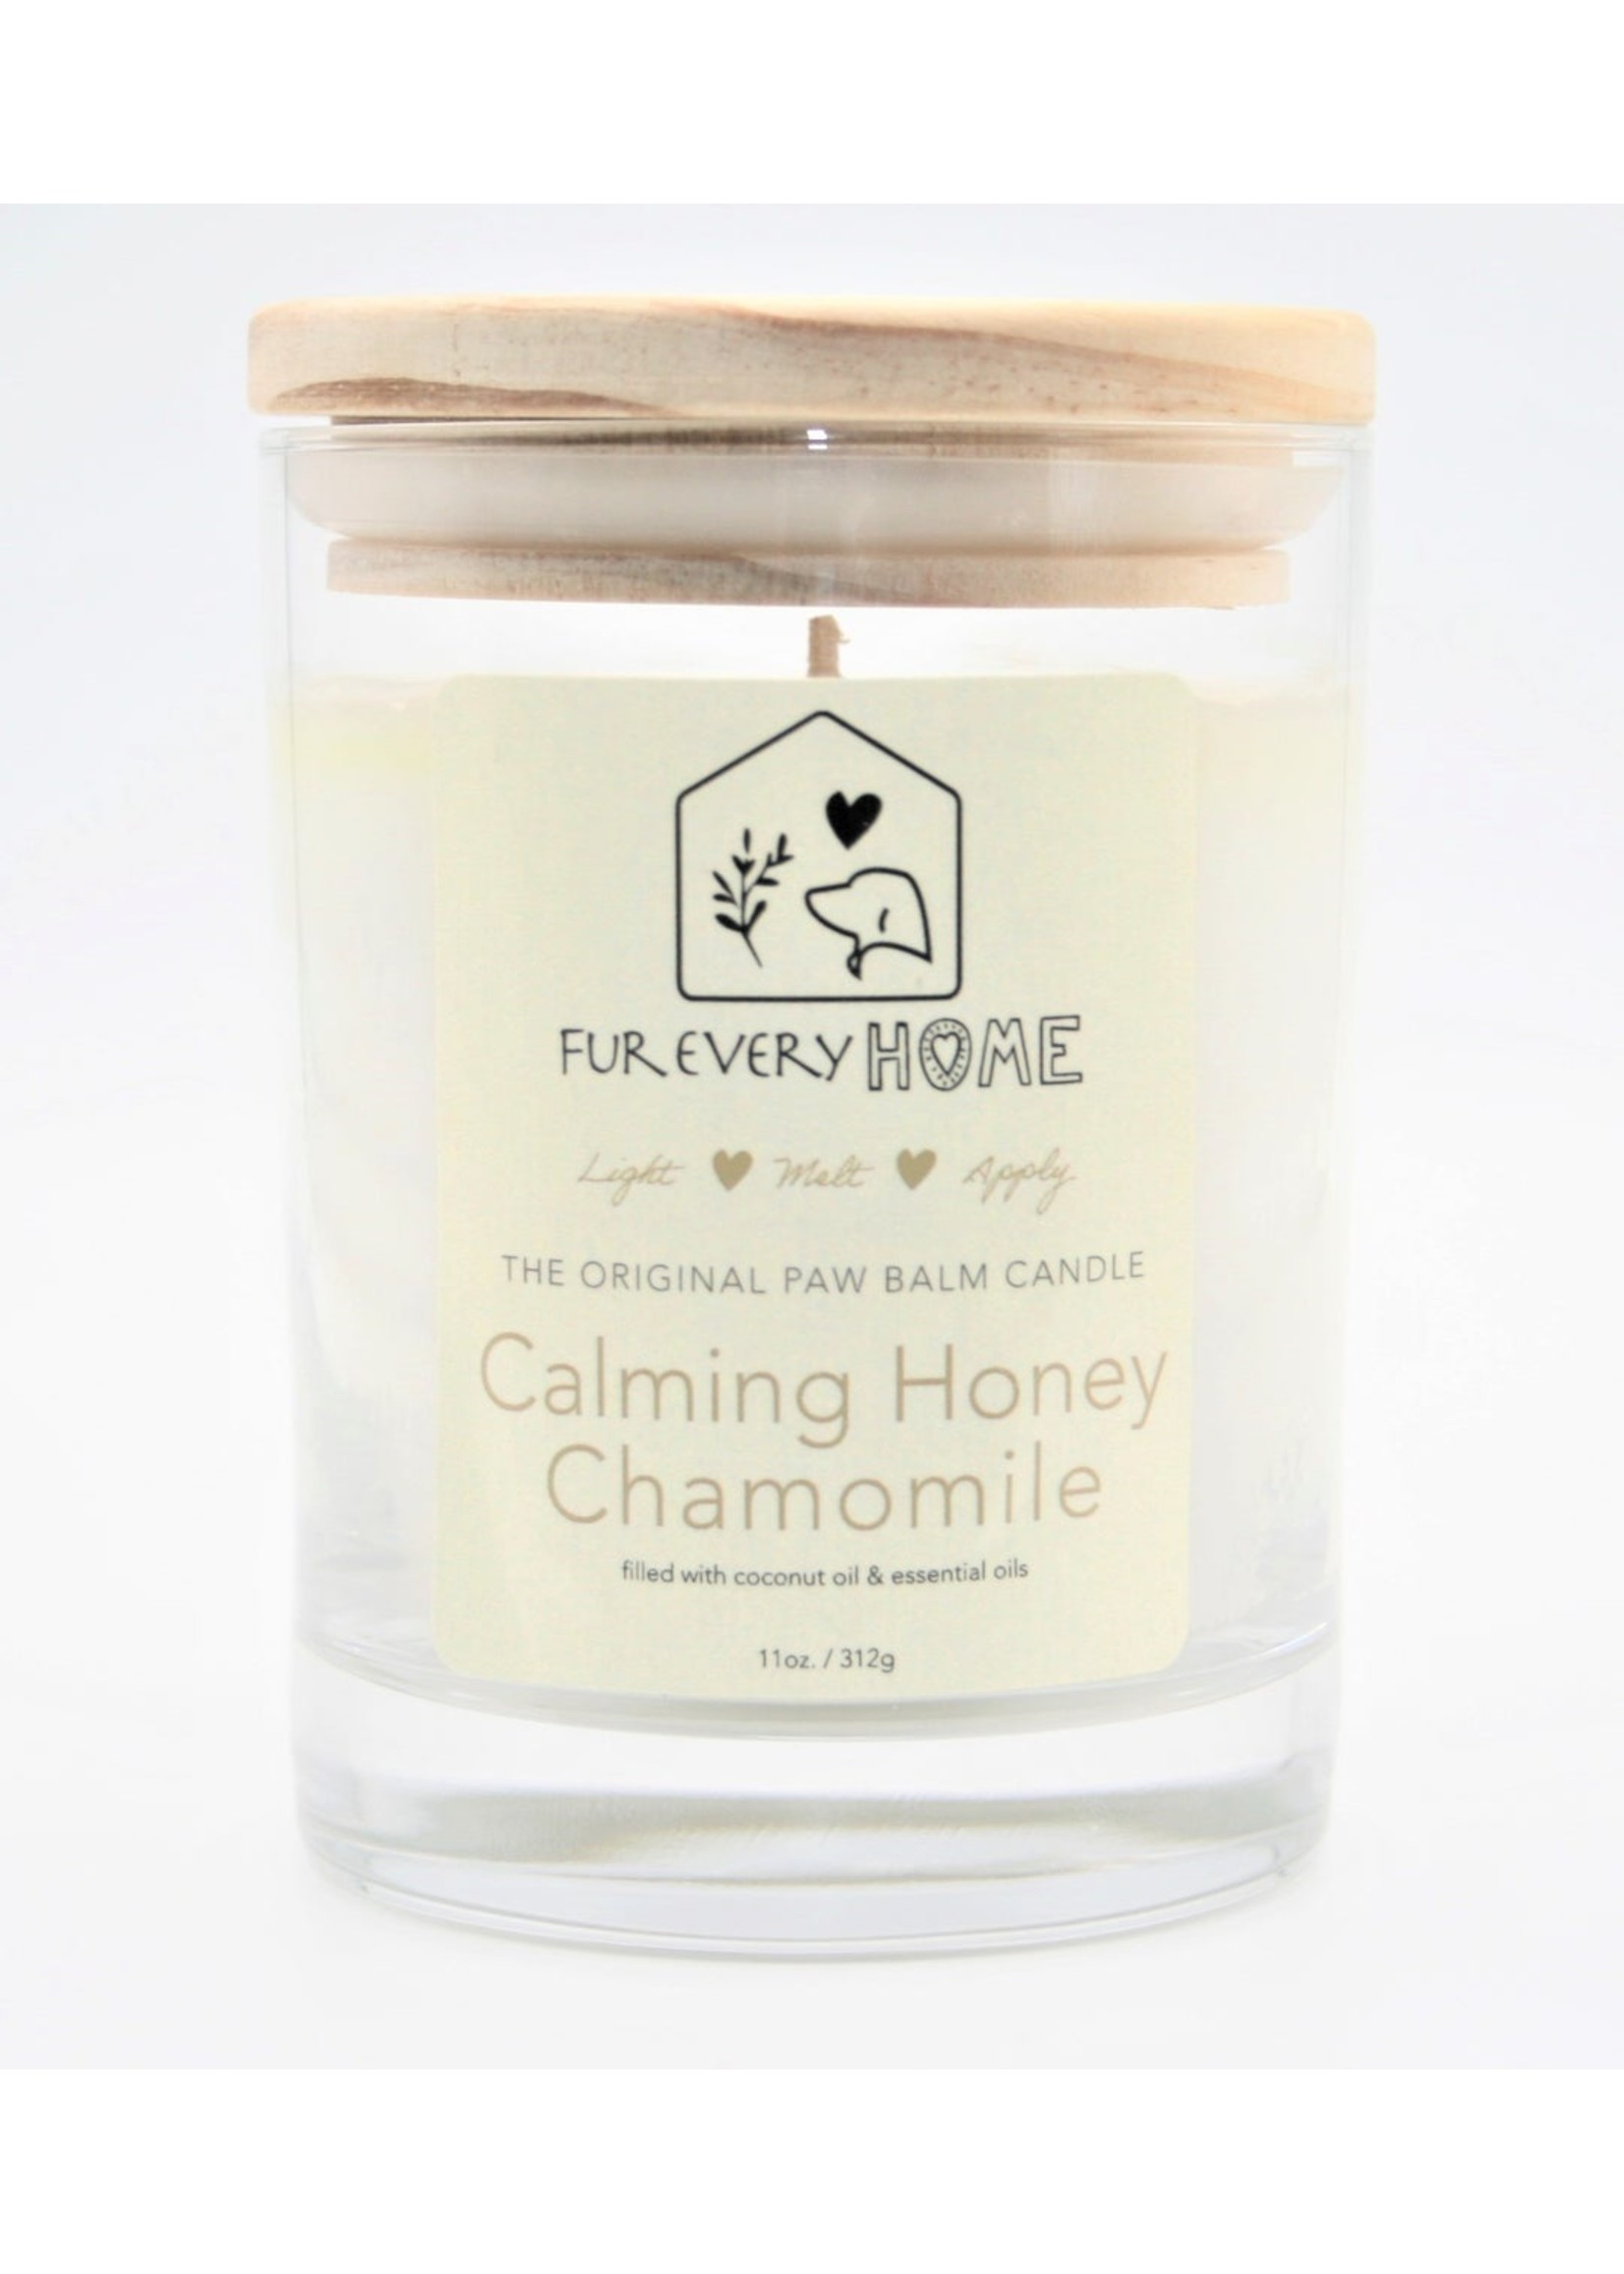 Fur Every Home Fur Every Home Calming Honey Chamomile Paw Balm Candle